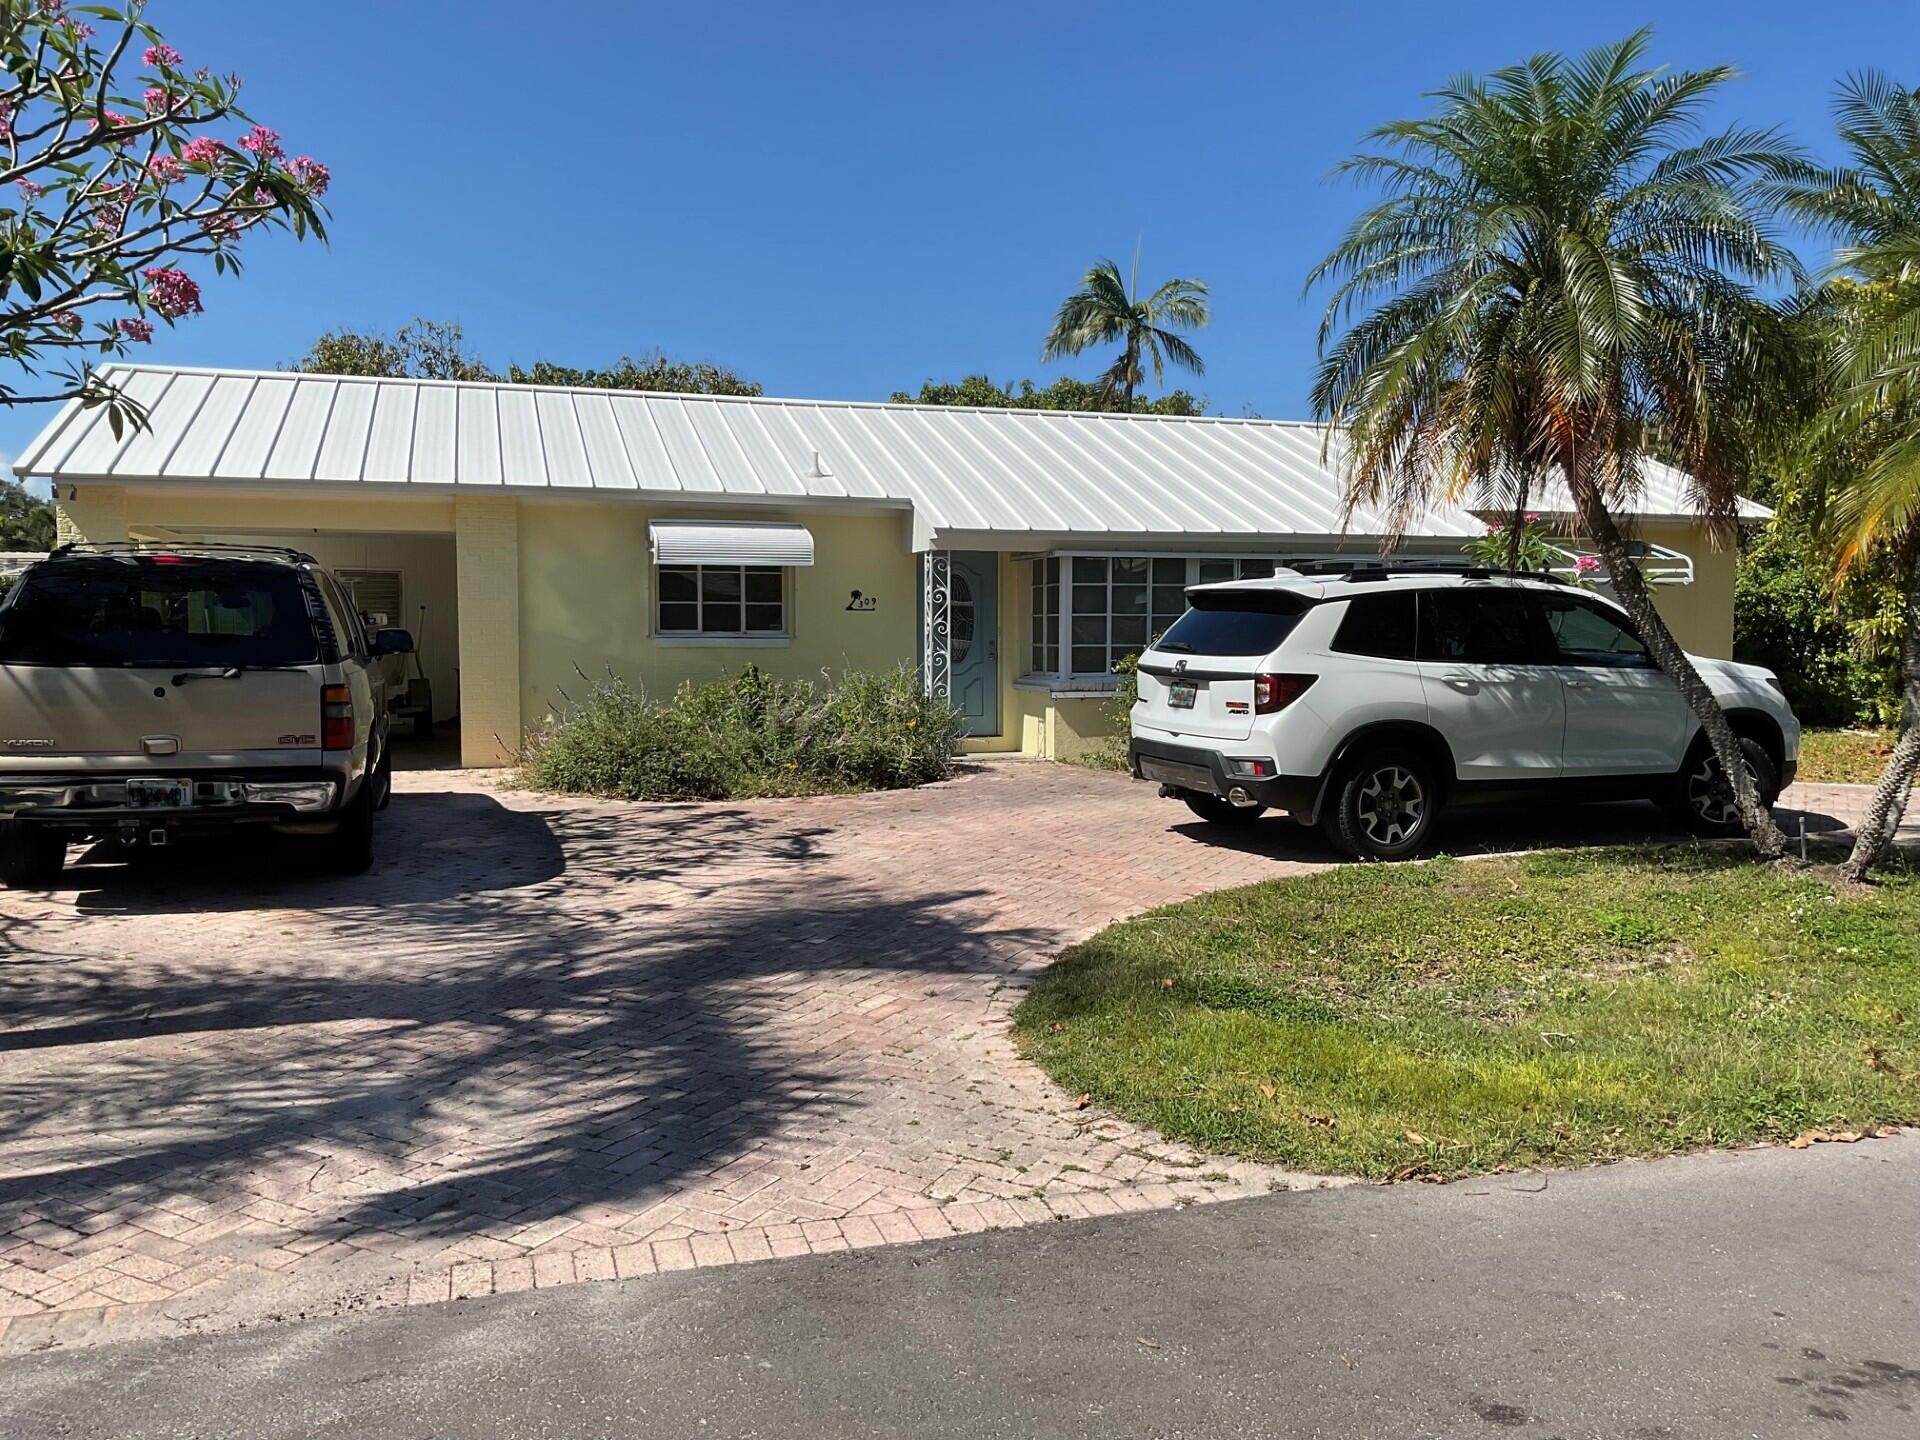 Great find in Palm Beach Shores!  3 bedrooms, 2 baths in one of the best locations in Palm Beach County.  Lots of tropical foliage and fruit trees. Walking distance to the beach, Sailfish Marina, Water Taxi, Palm Beach Inlet, restaurants and shopping.